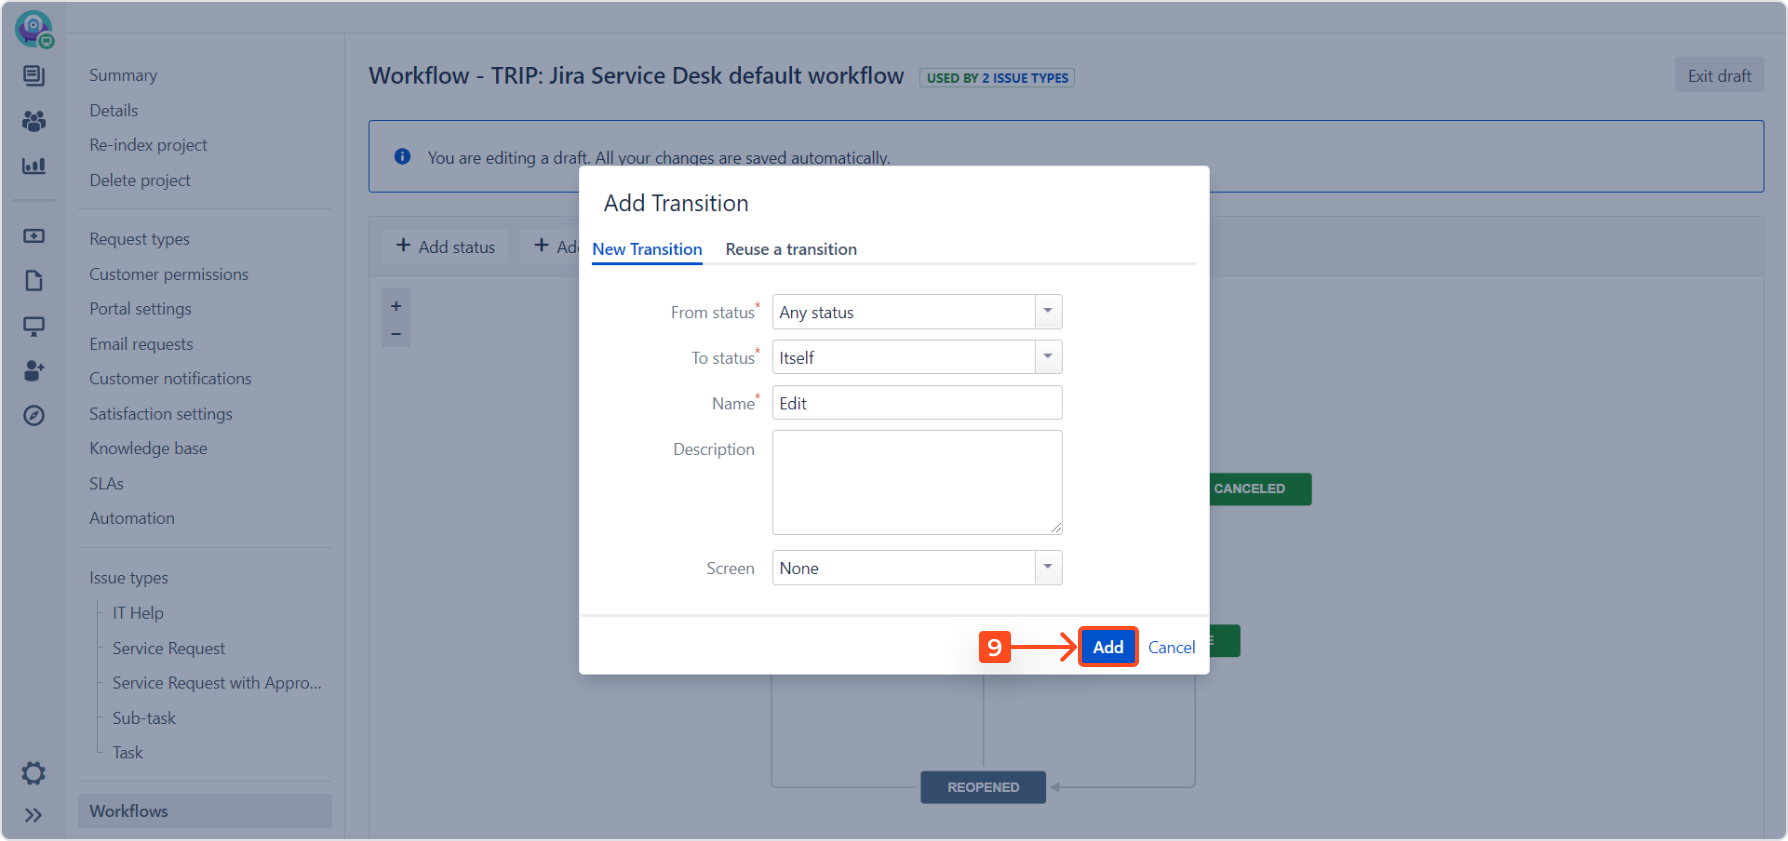 Enable the Jira Service Management self service